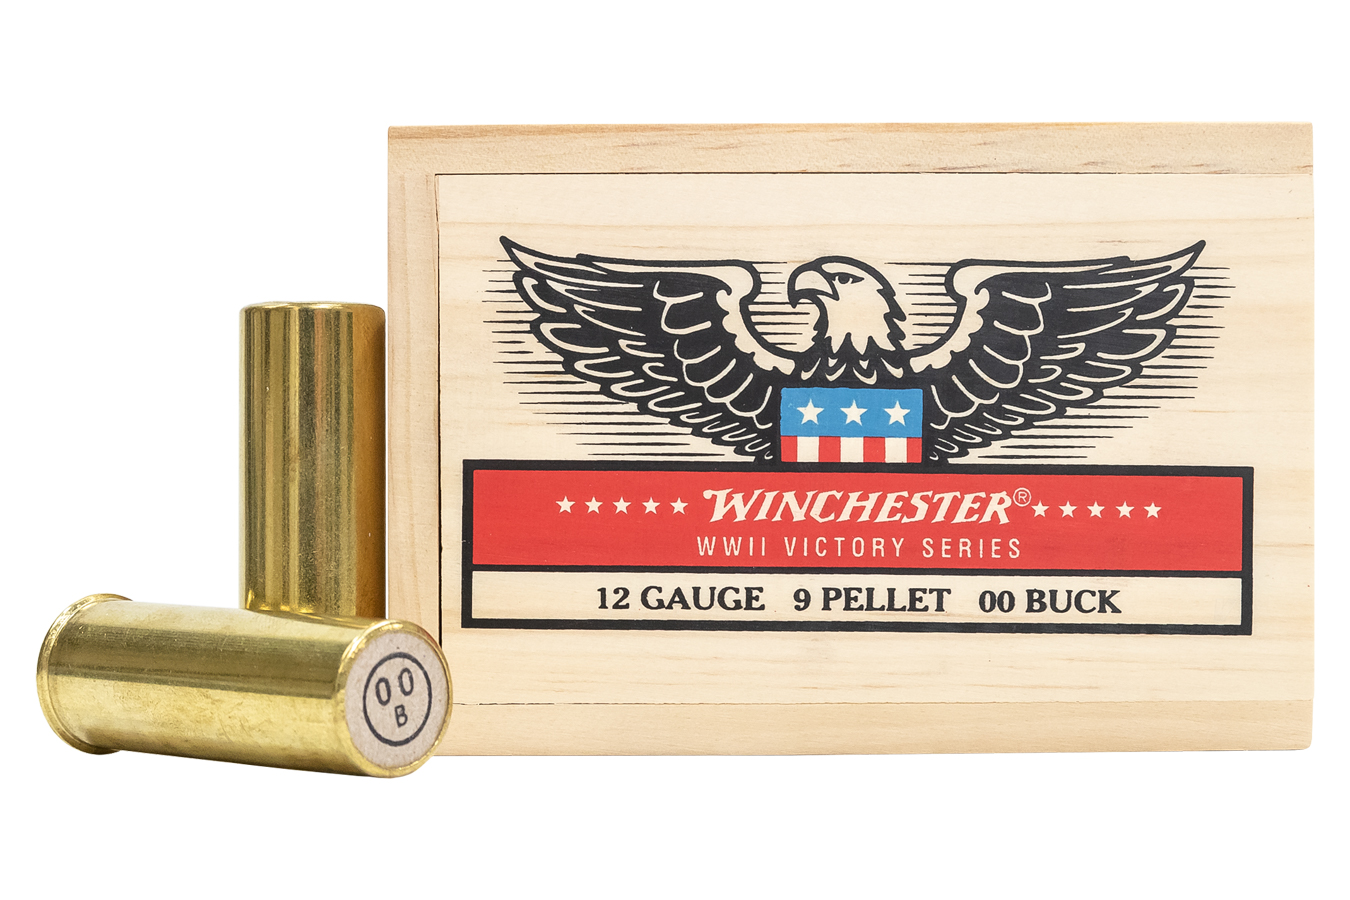 WWI Winchester Brass Shotgun Shells Box Reproduction - WWII Soldier